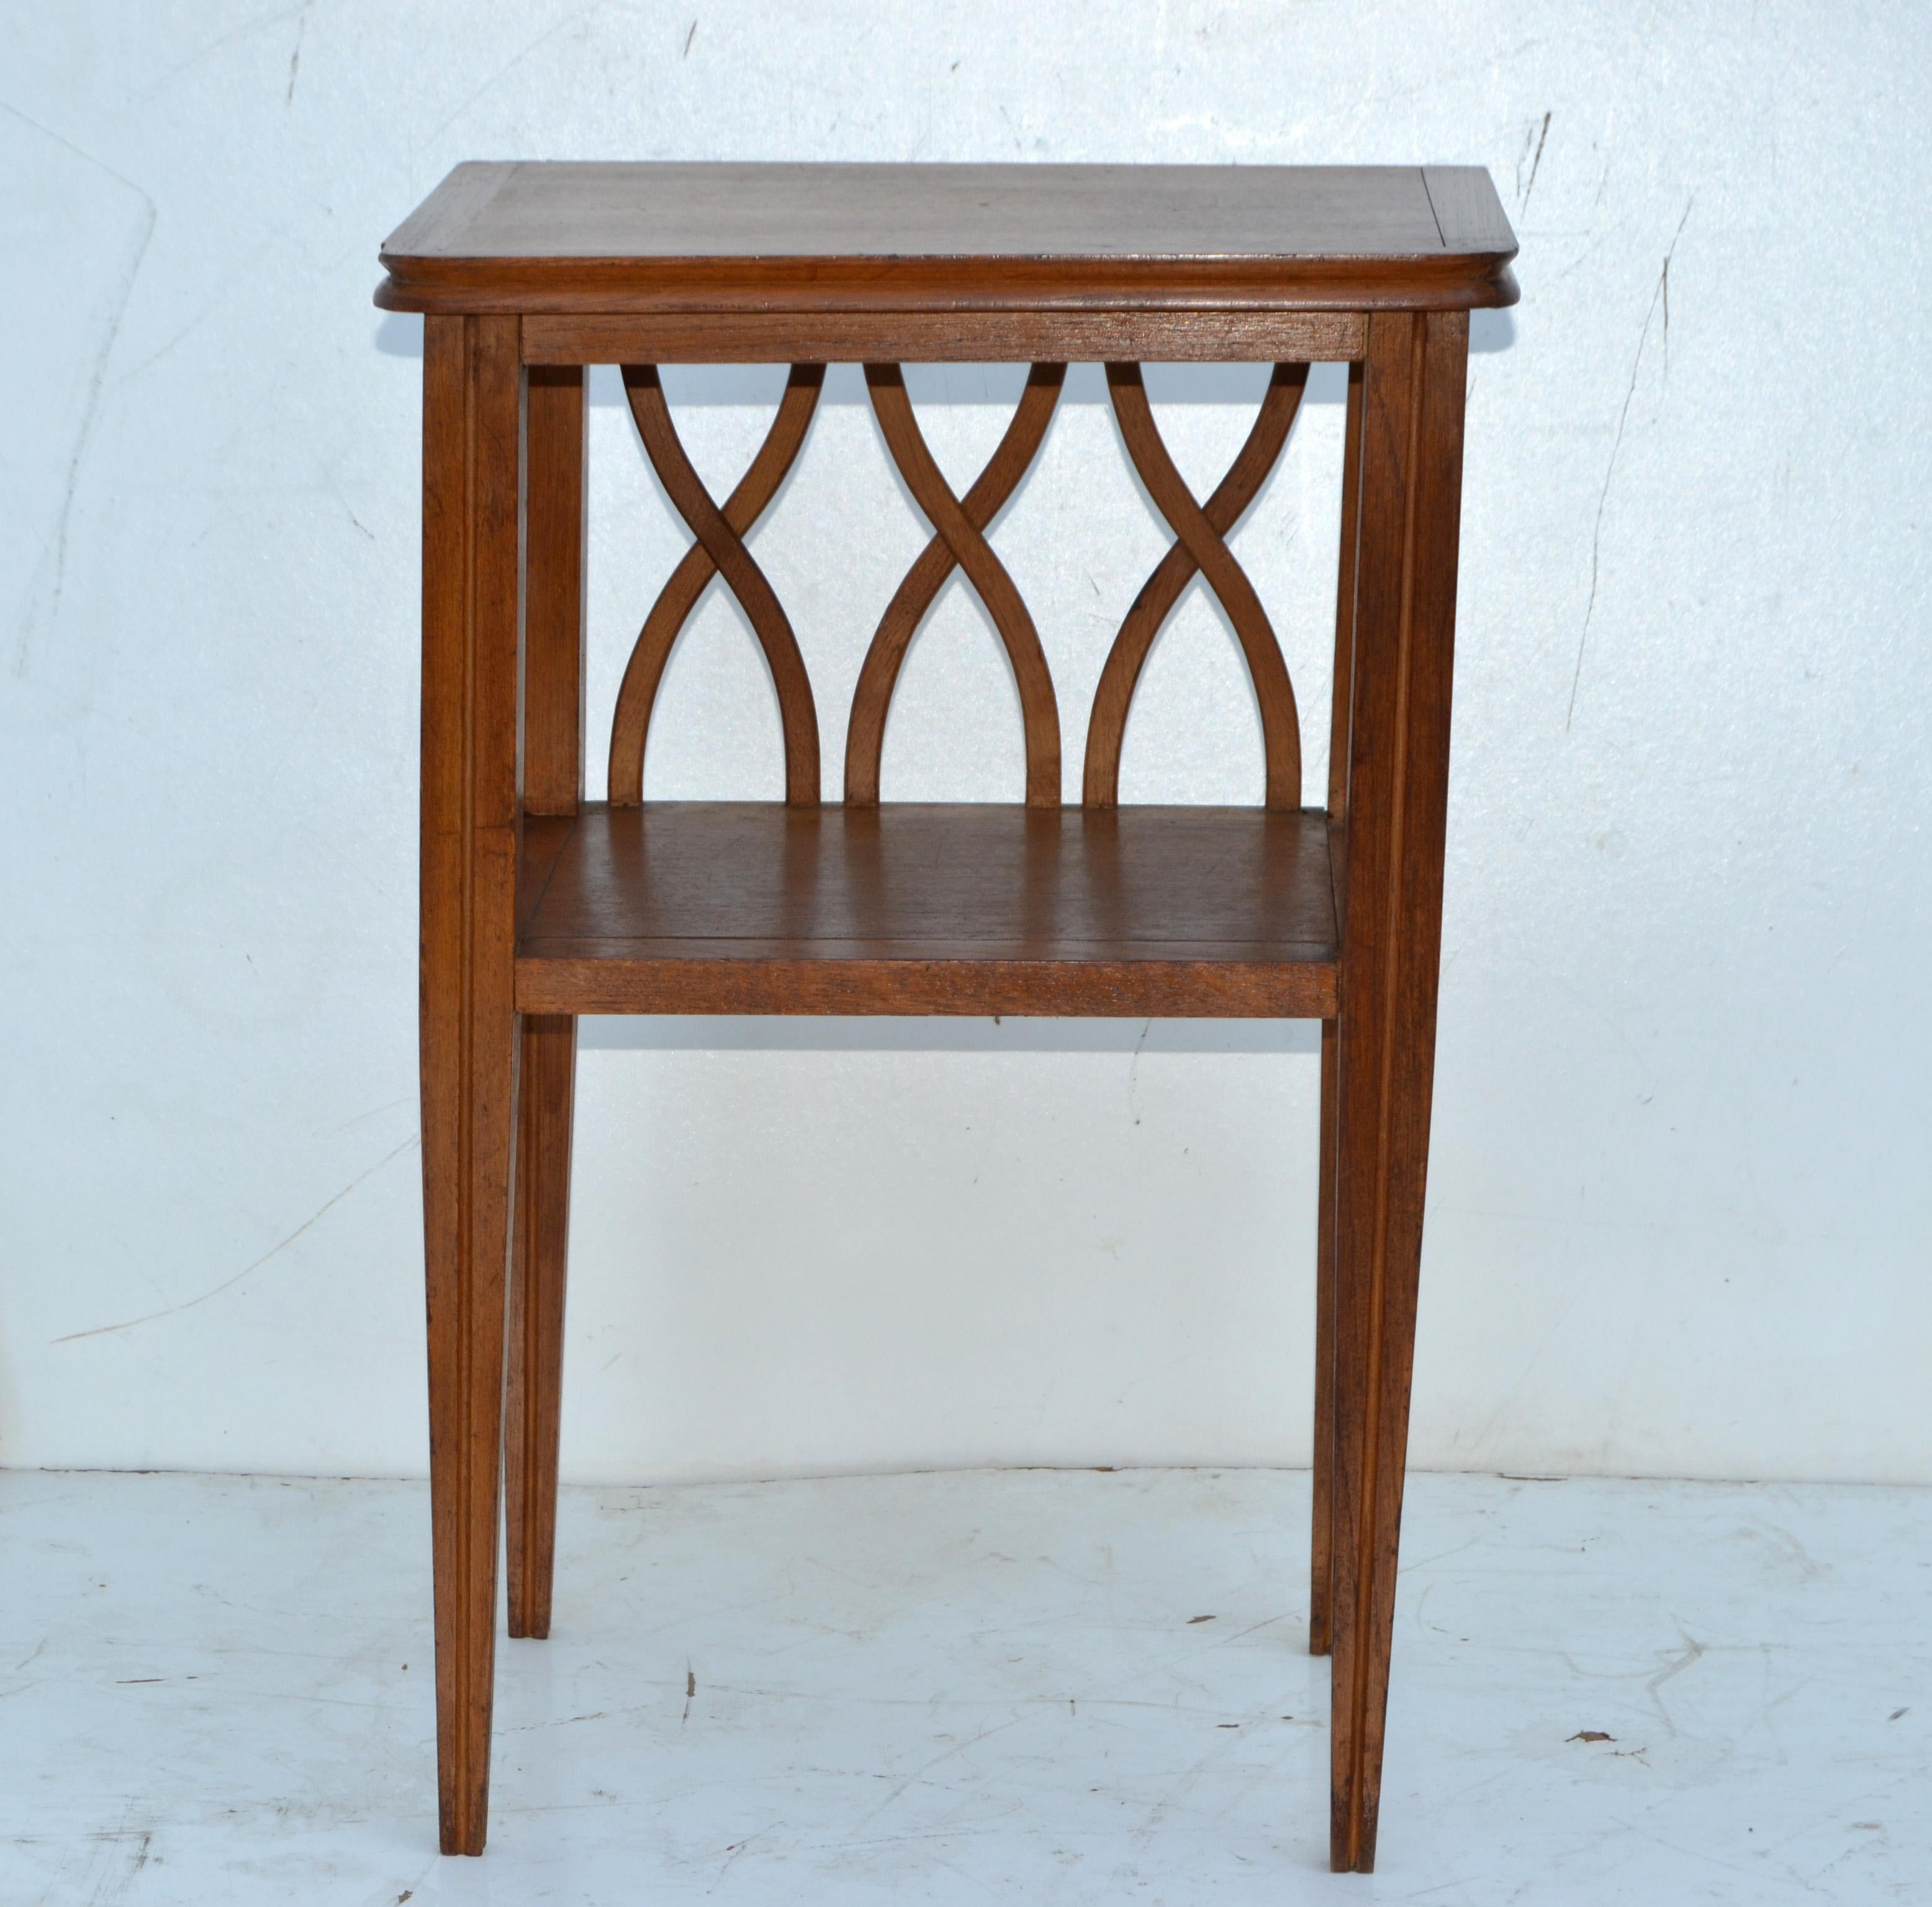 Gerard Guermonprez designed oak wood side table, bedside table or night stand with tapered legs.
Beautifully carved and very elegant in appearance.
French Mid-Century Modern made in the 1950.